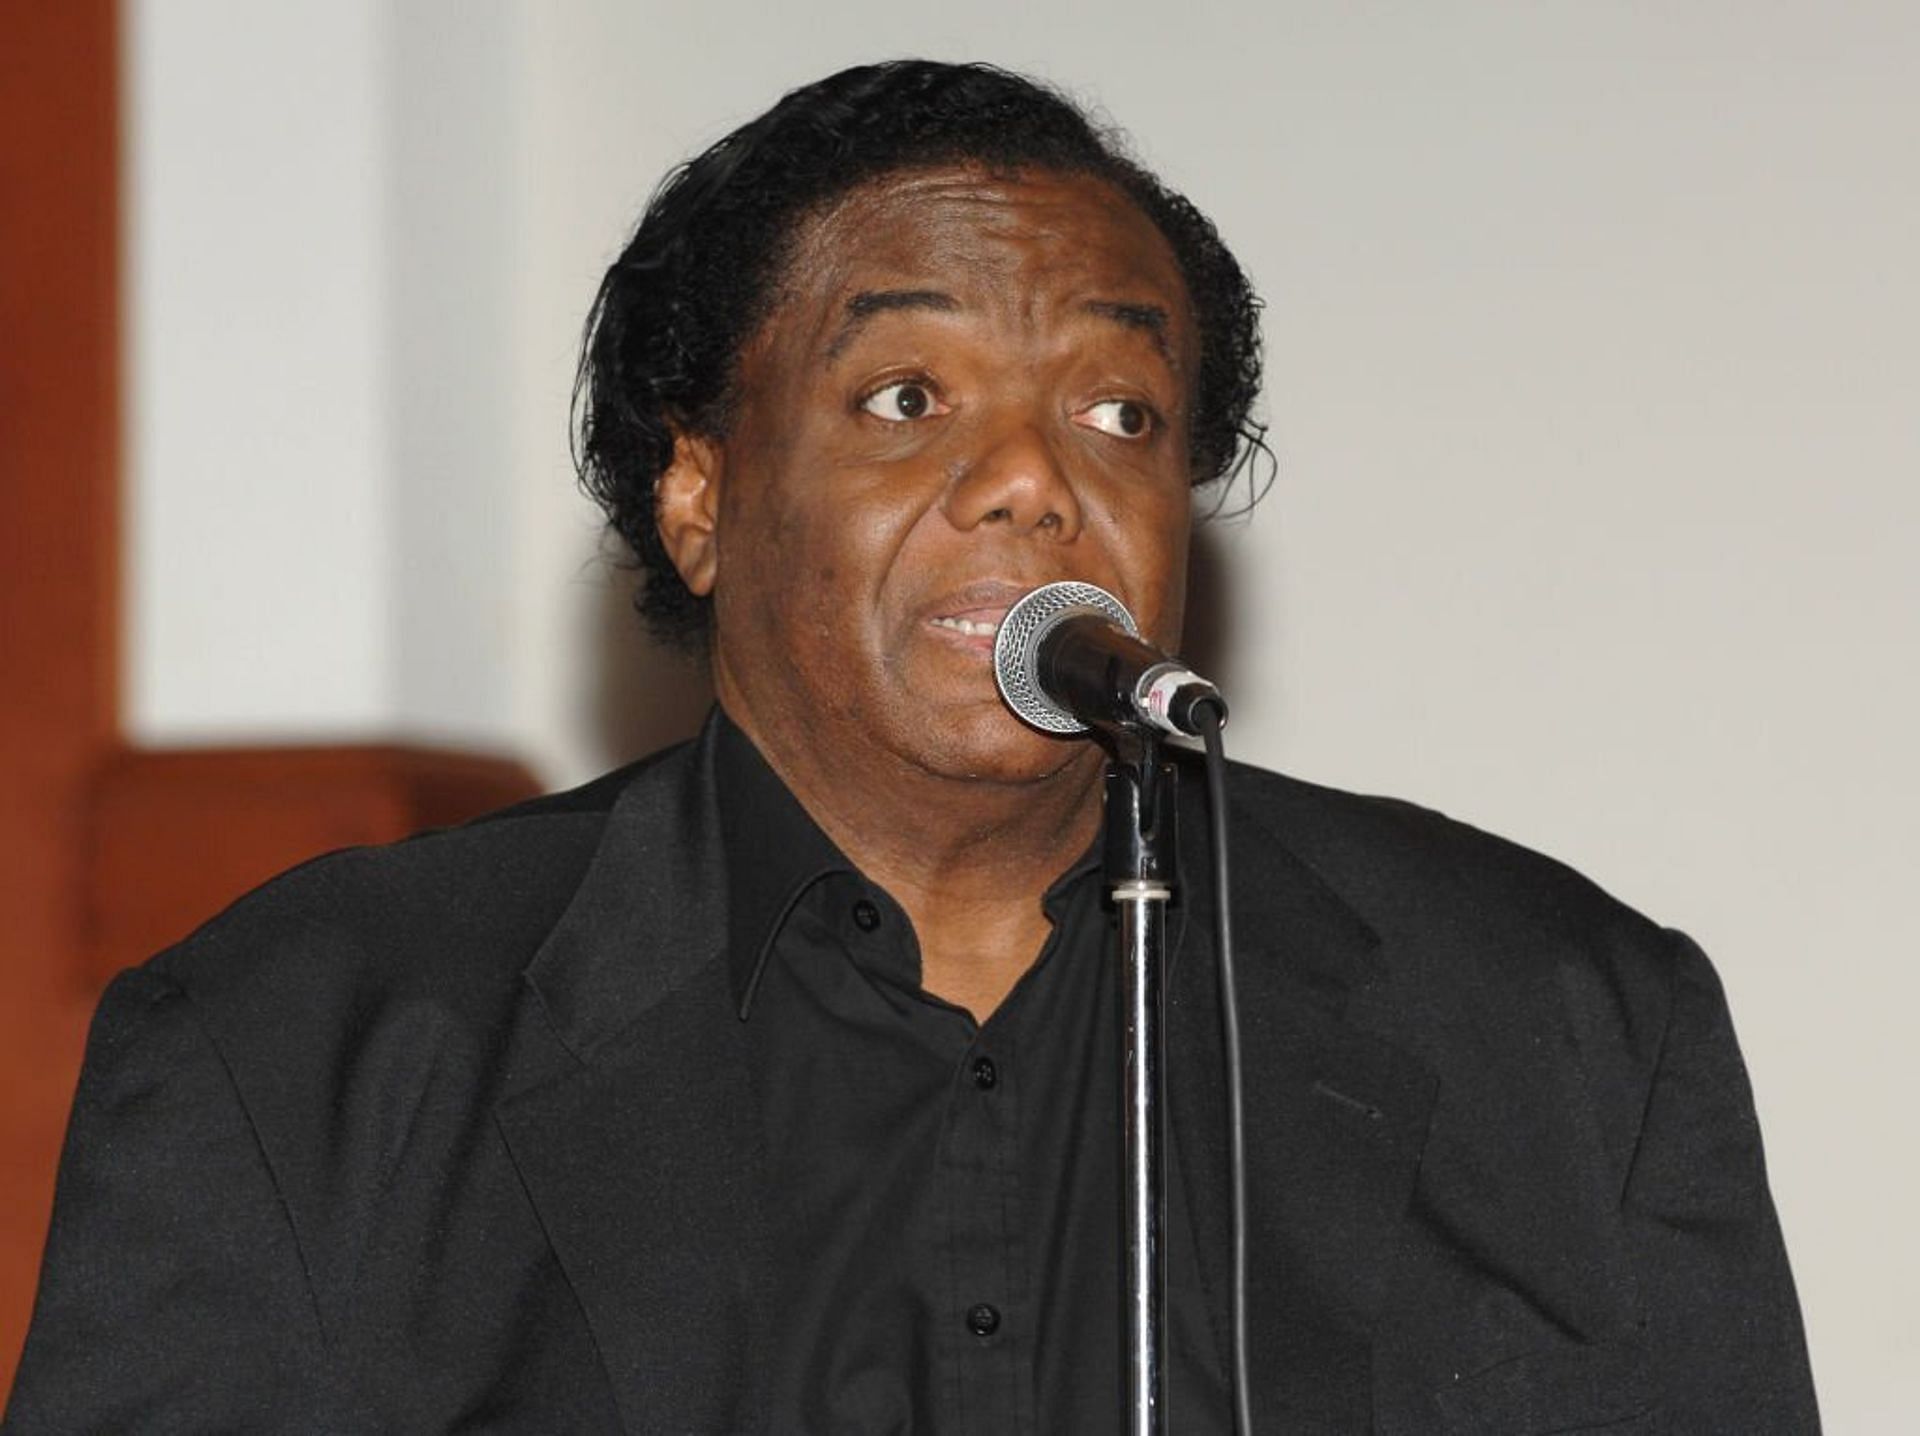 Lamont Dozier was a popular singer, songwriter and, record producer (Image via L. Cohen/Getty Images)